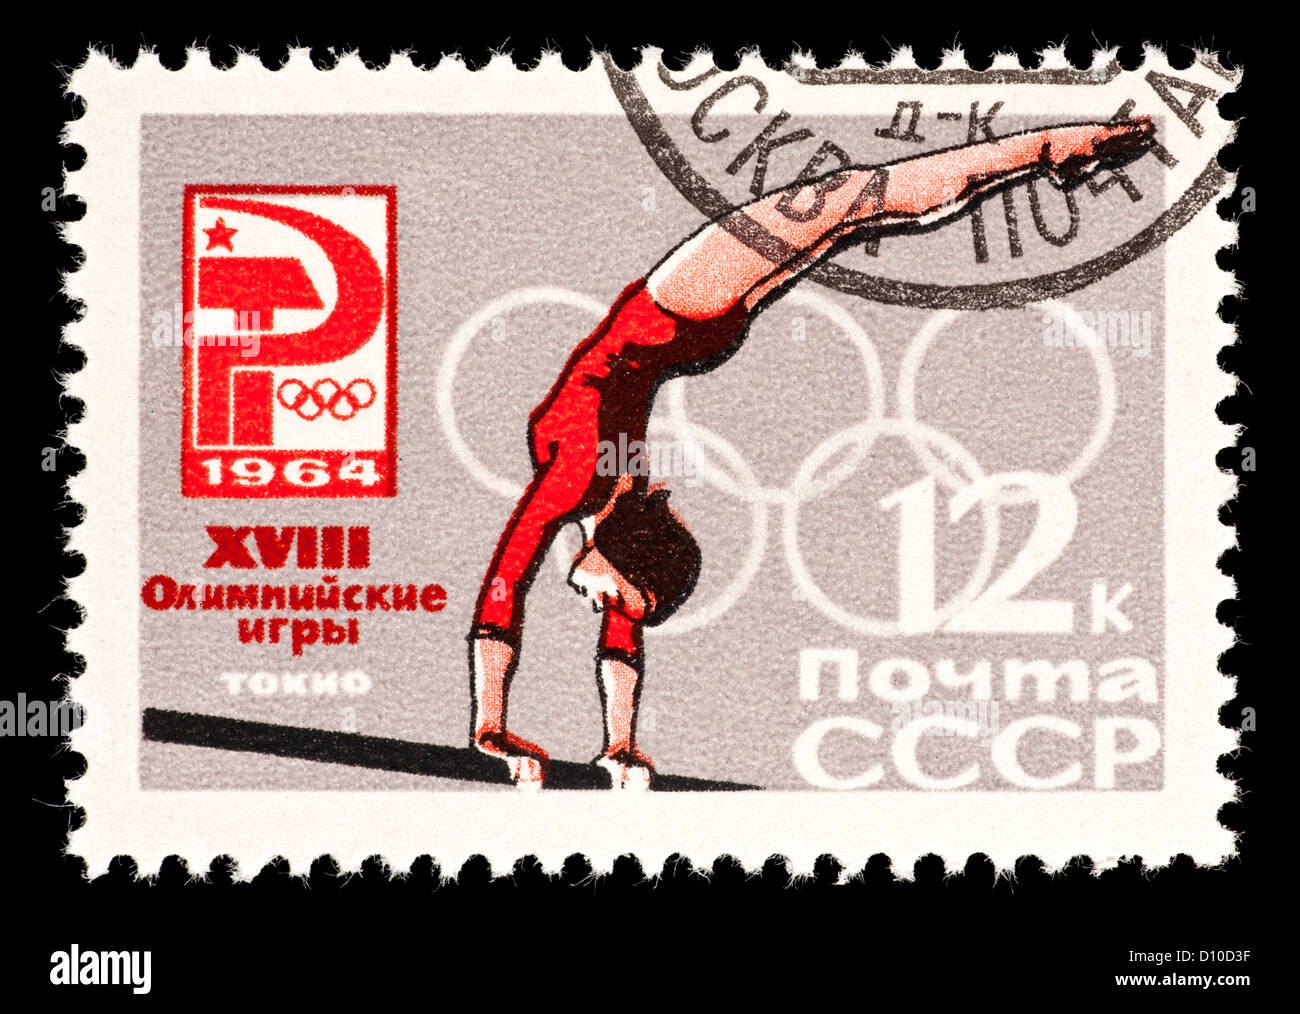 Postage stamp from the Soviet Union (USSR) depicting a gymnast on the parallel bars, issued  for the 1964 Summer Olympic Games. Stock Photo